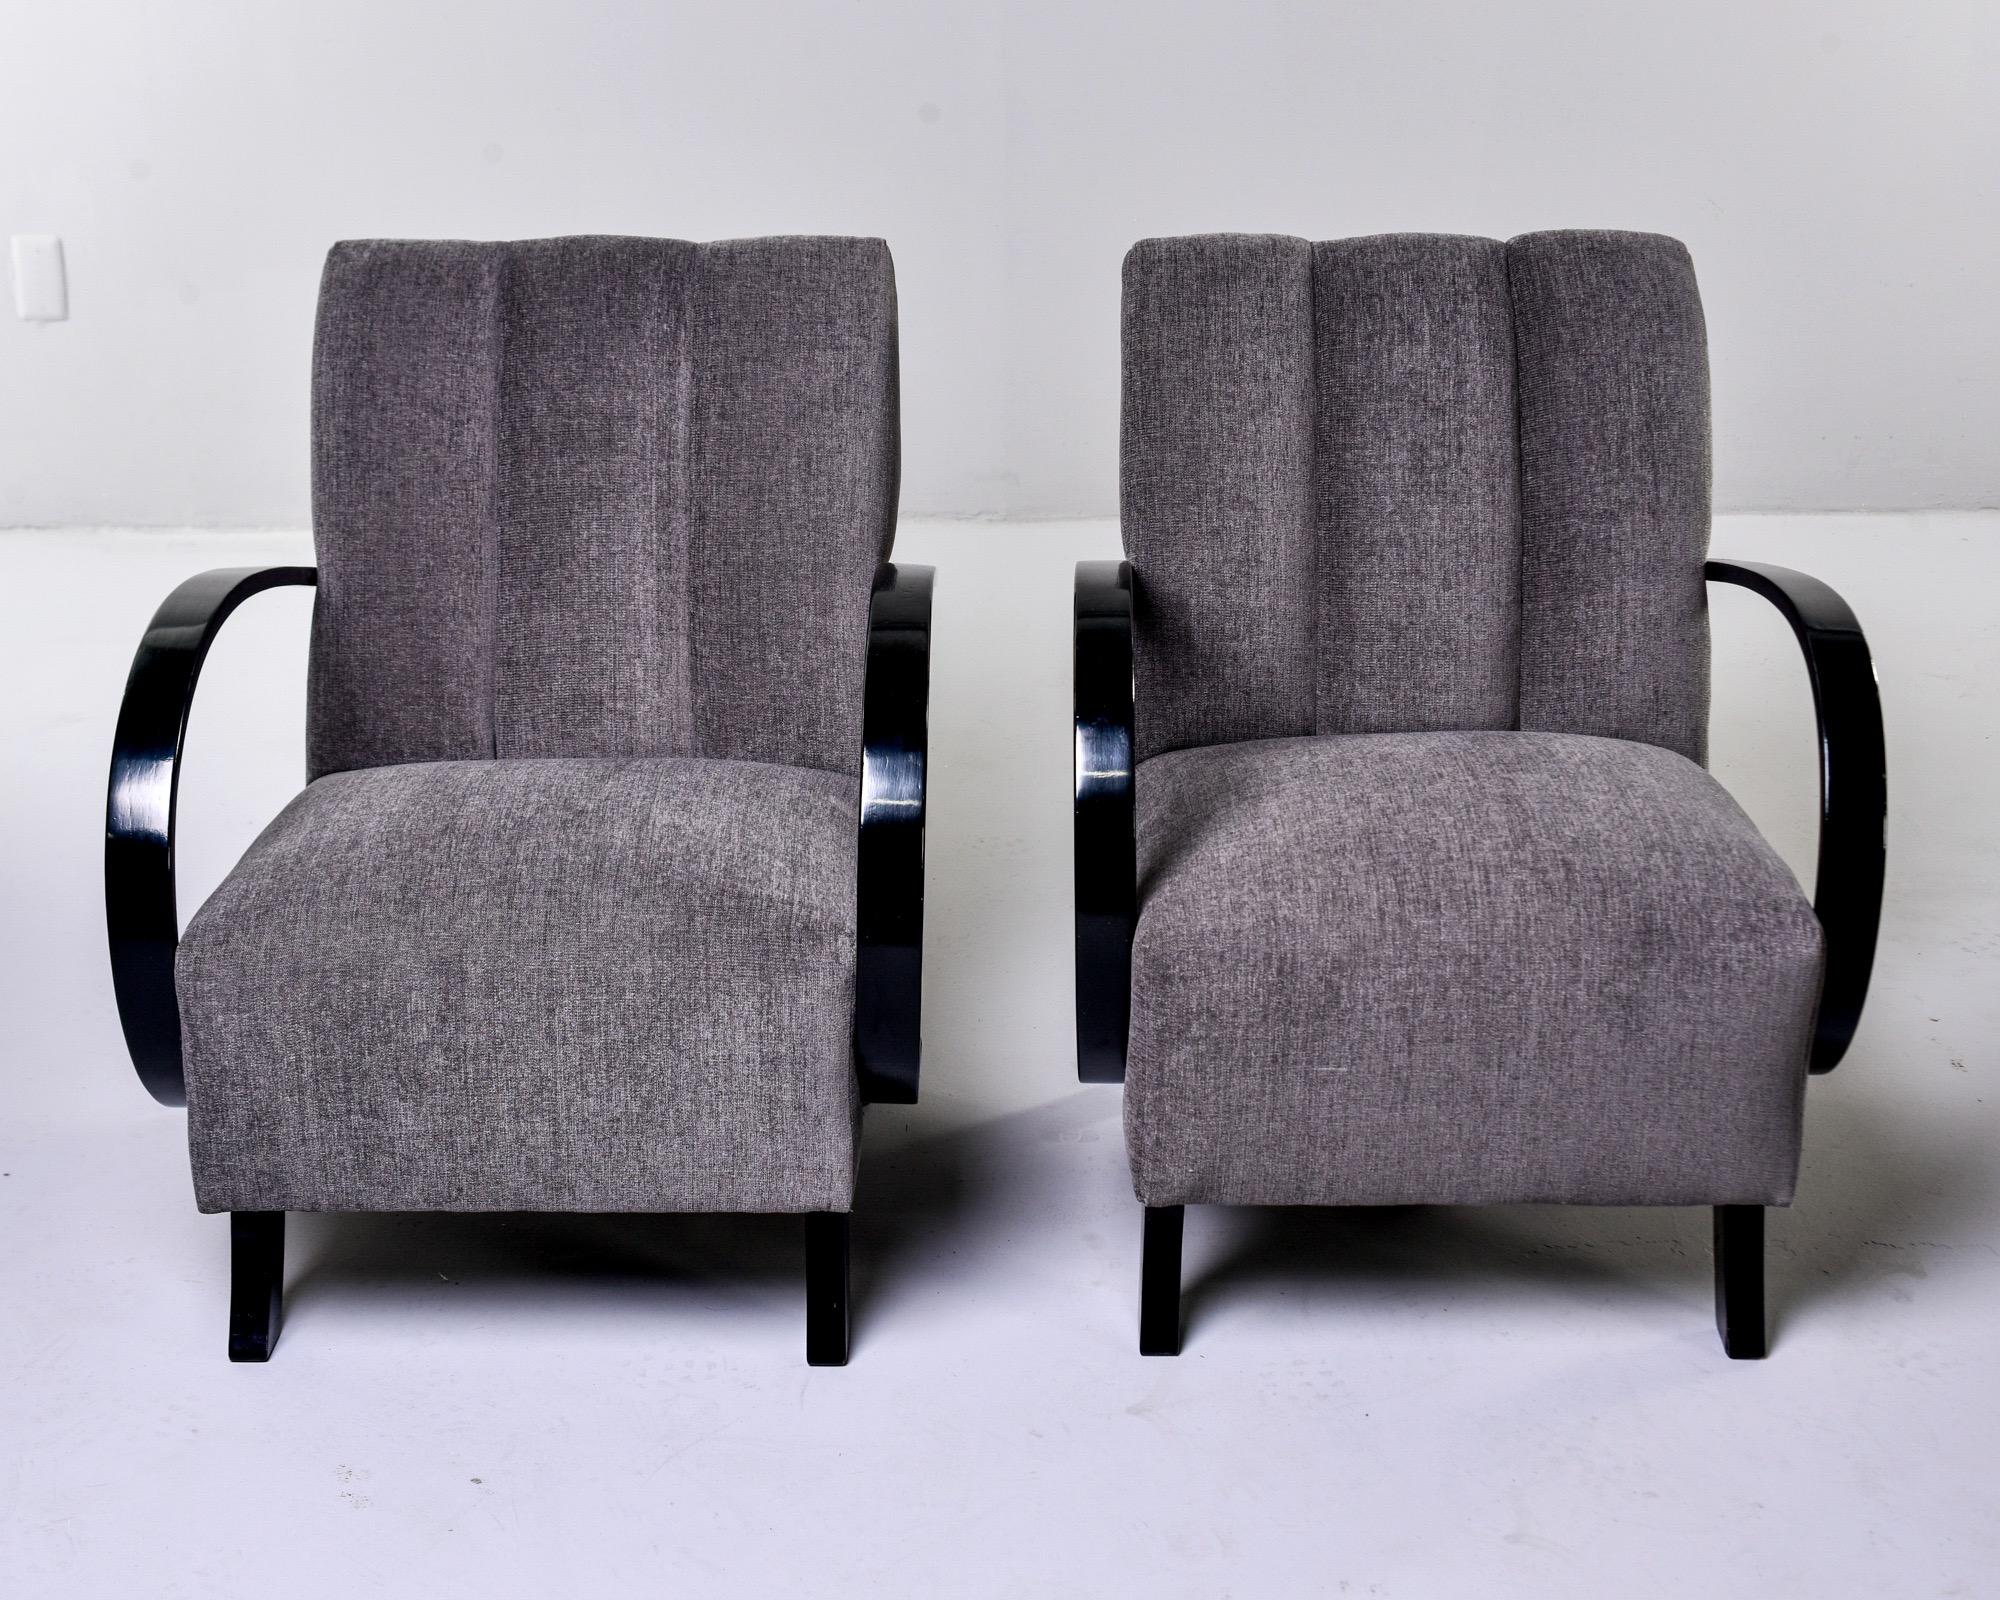 Pair of model H237 armchairs designed by Jindrich Halabala, circa 1930s. The frames have a new ebonized finish and the chairs have been reupholstered in a gray chenille velvet. Sold and priced as a pair. 

Measures: Arm height 23” seat height